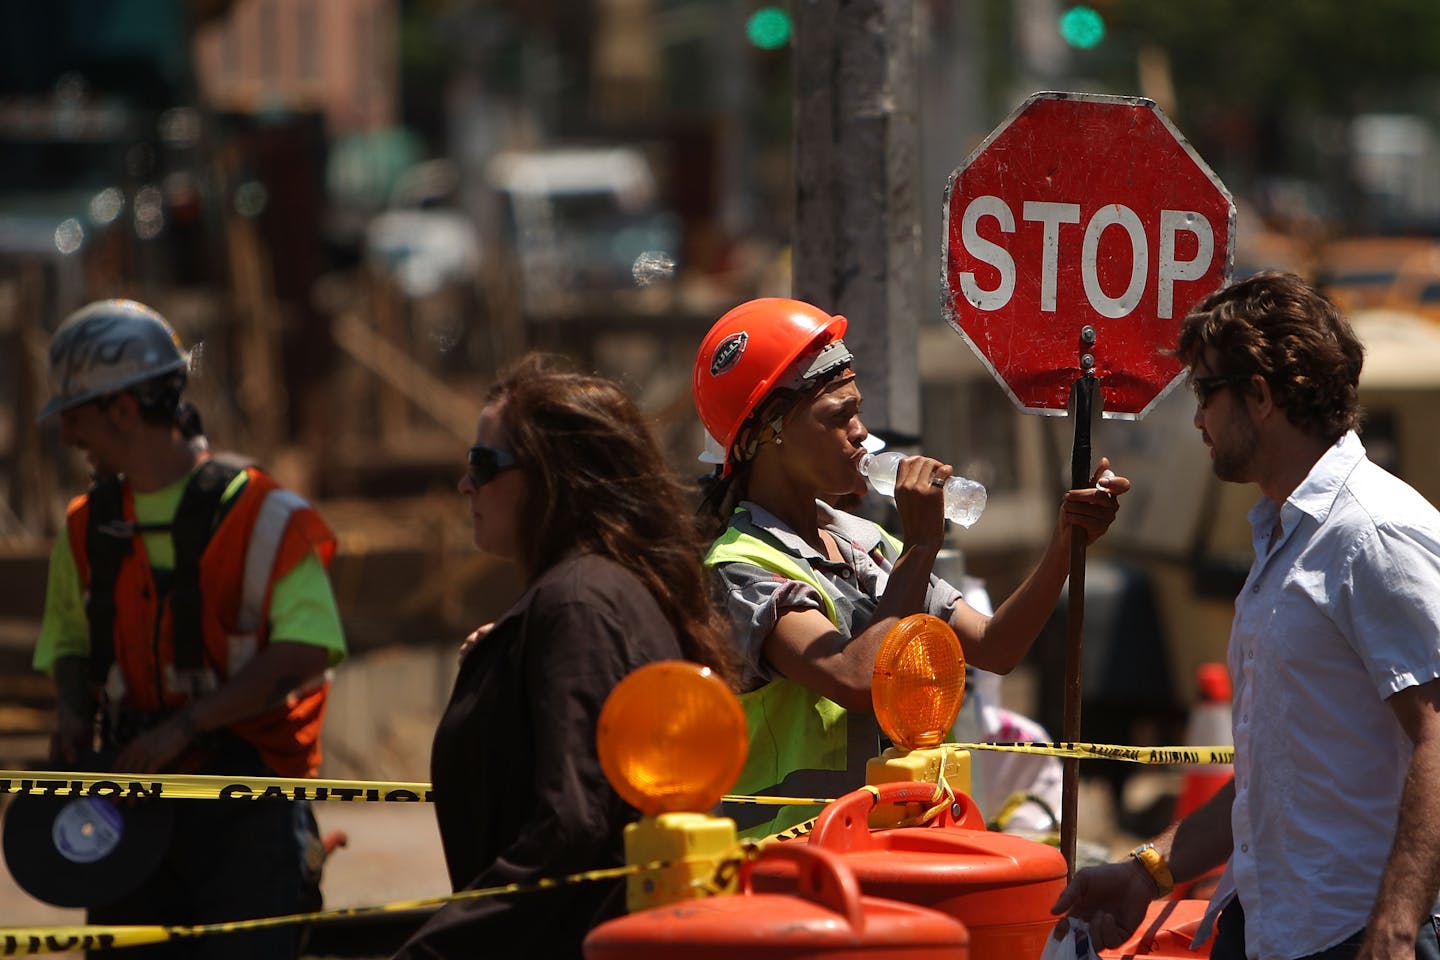 A construction worker, in a hard hat and drinking from a water bottle, holds a stop sign as people cross the street on a hot day in New York City.